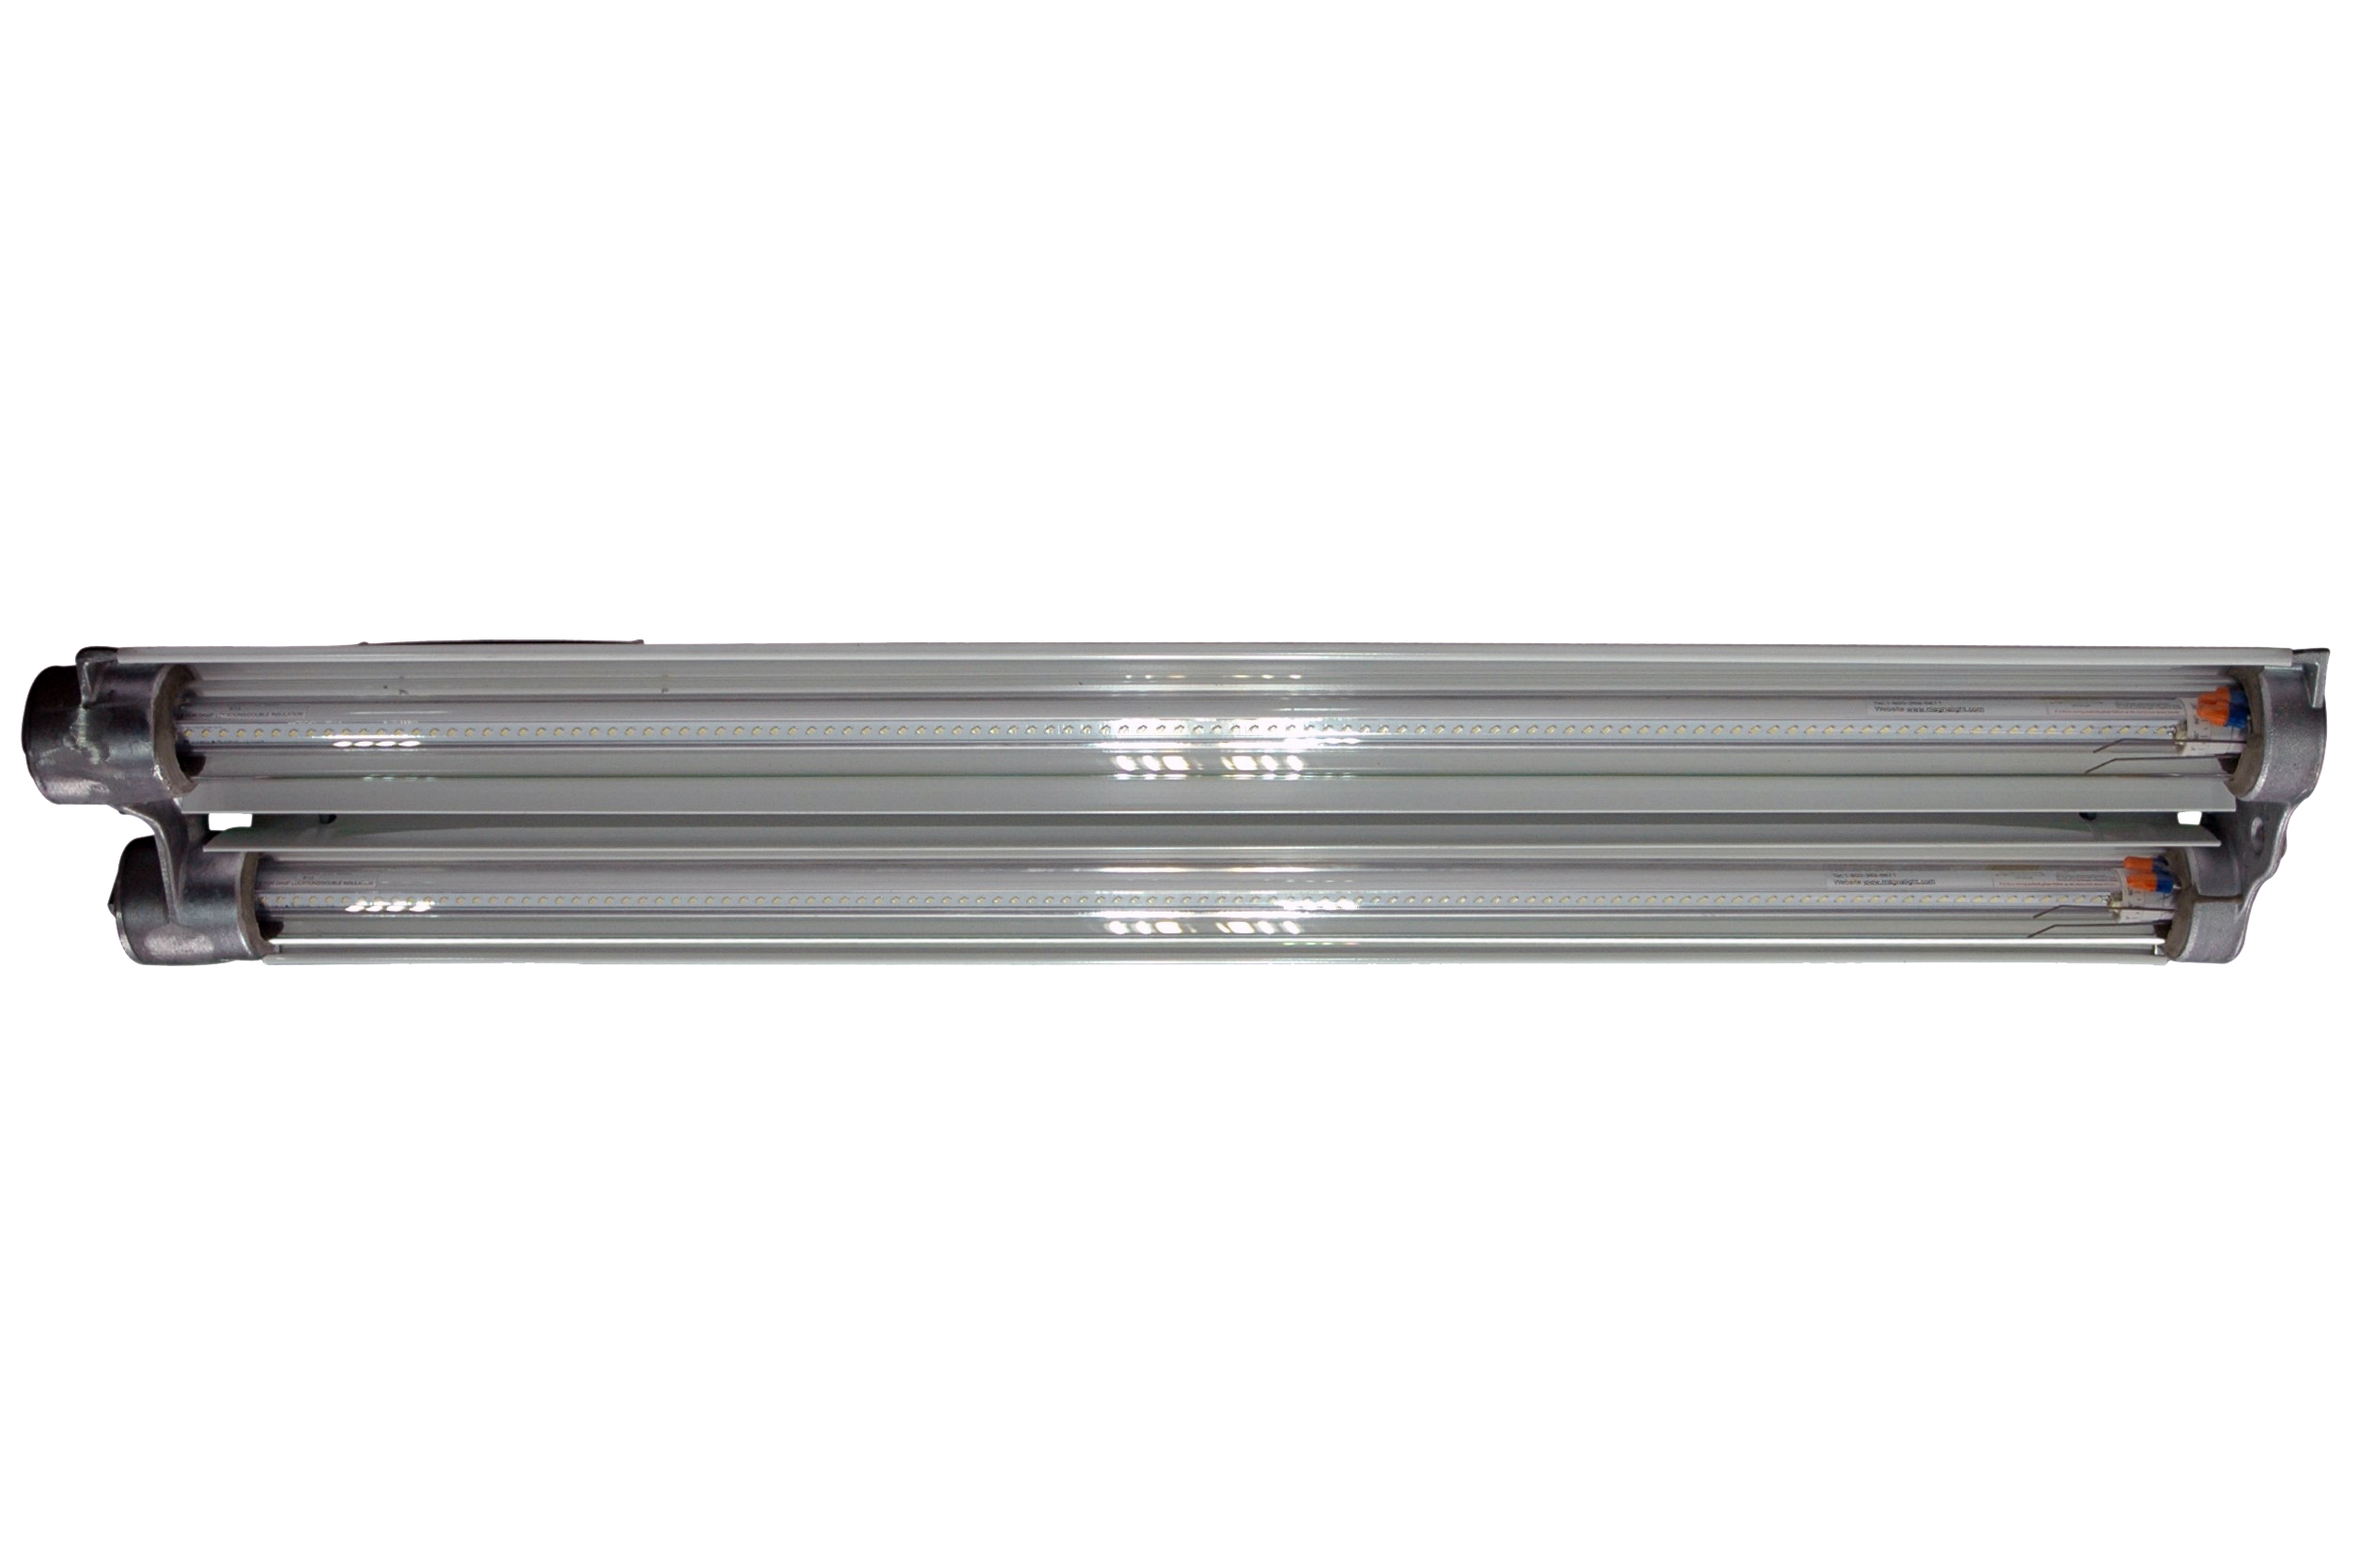 Class 1 Division 1 Visible and Ultraviolet Combination LED Light Fixture